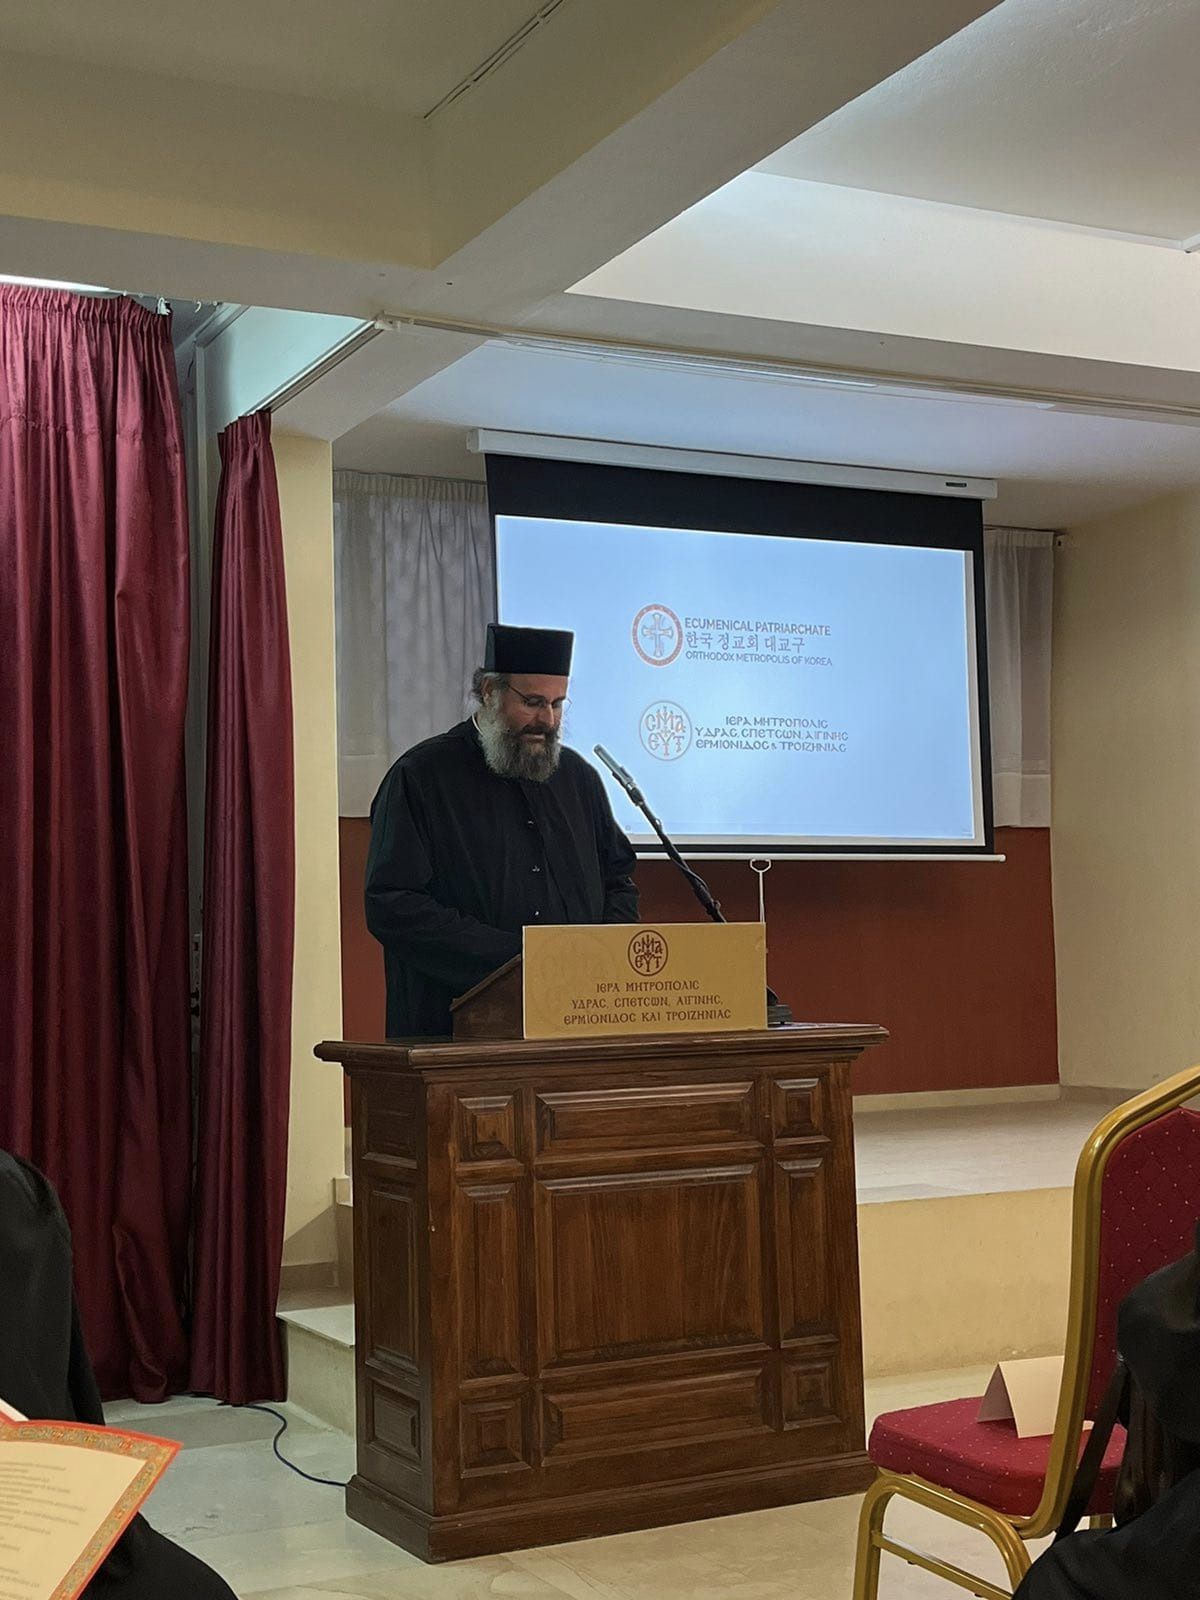 Metropolitan of Korea delivers inspiring speech at event organised by the Metropolis of Hydra